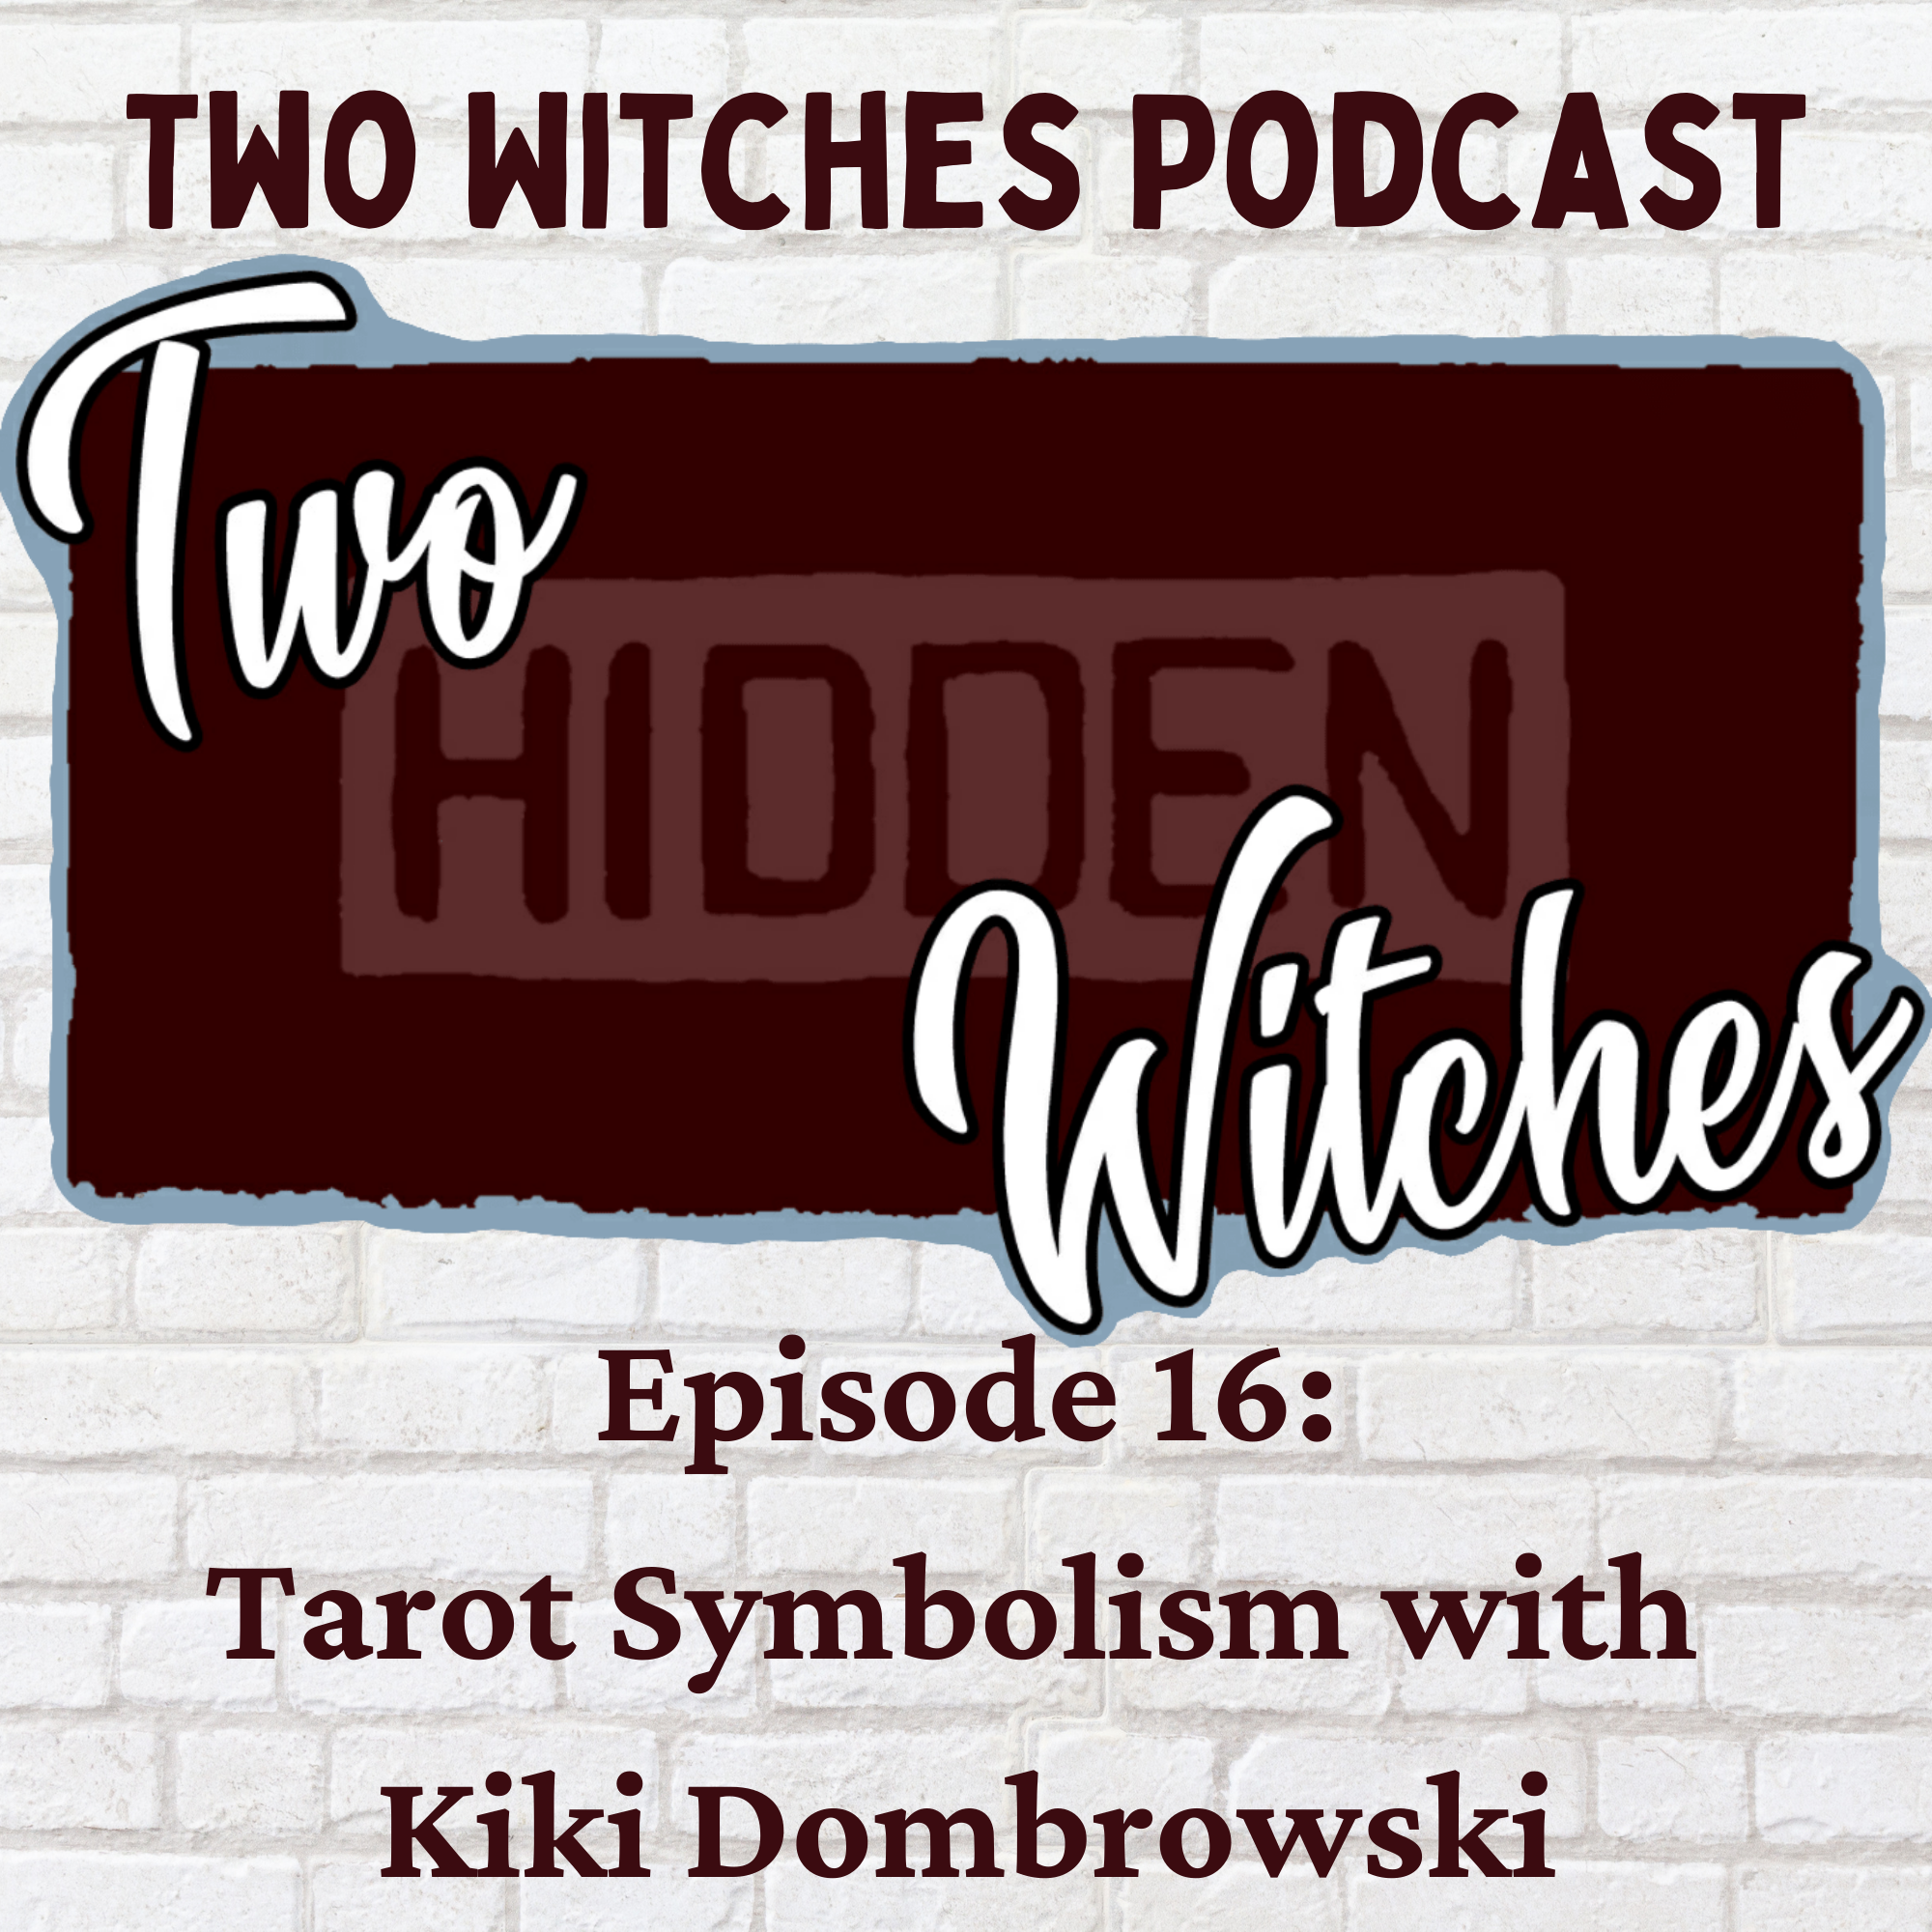 Tarot Symbolism in Bricks, Churches, and Arches